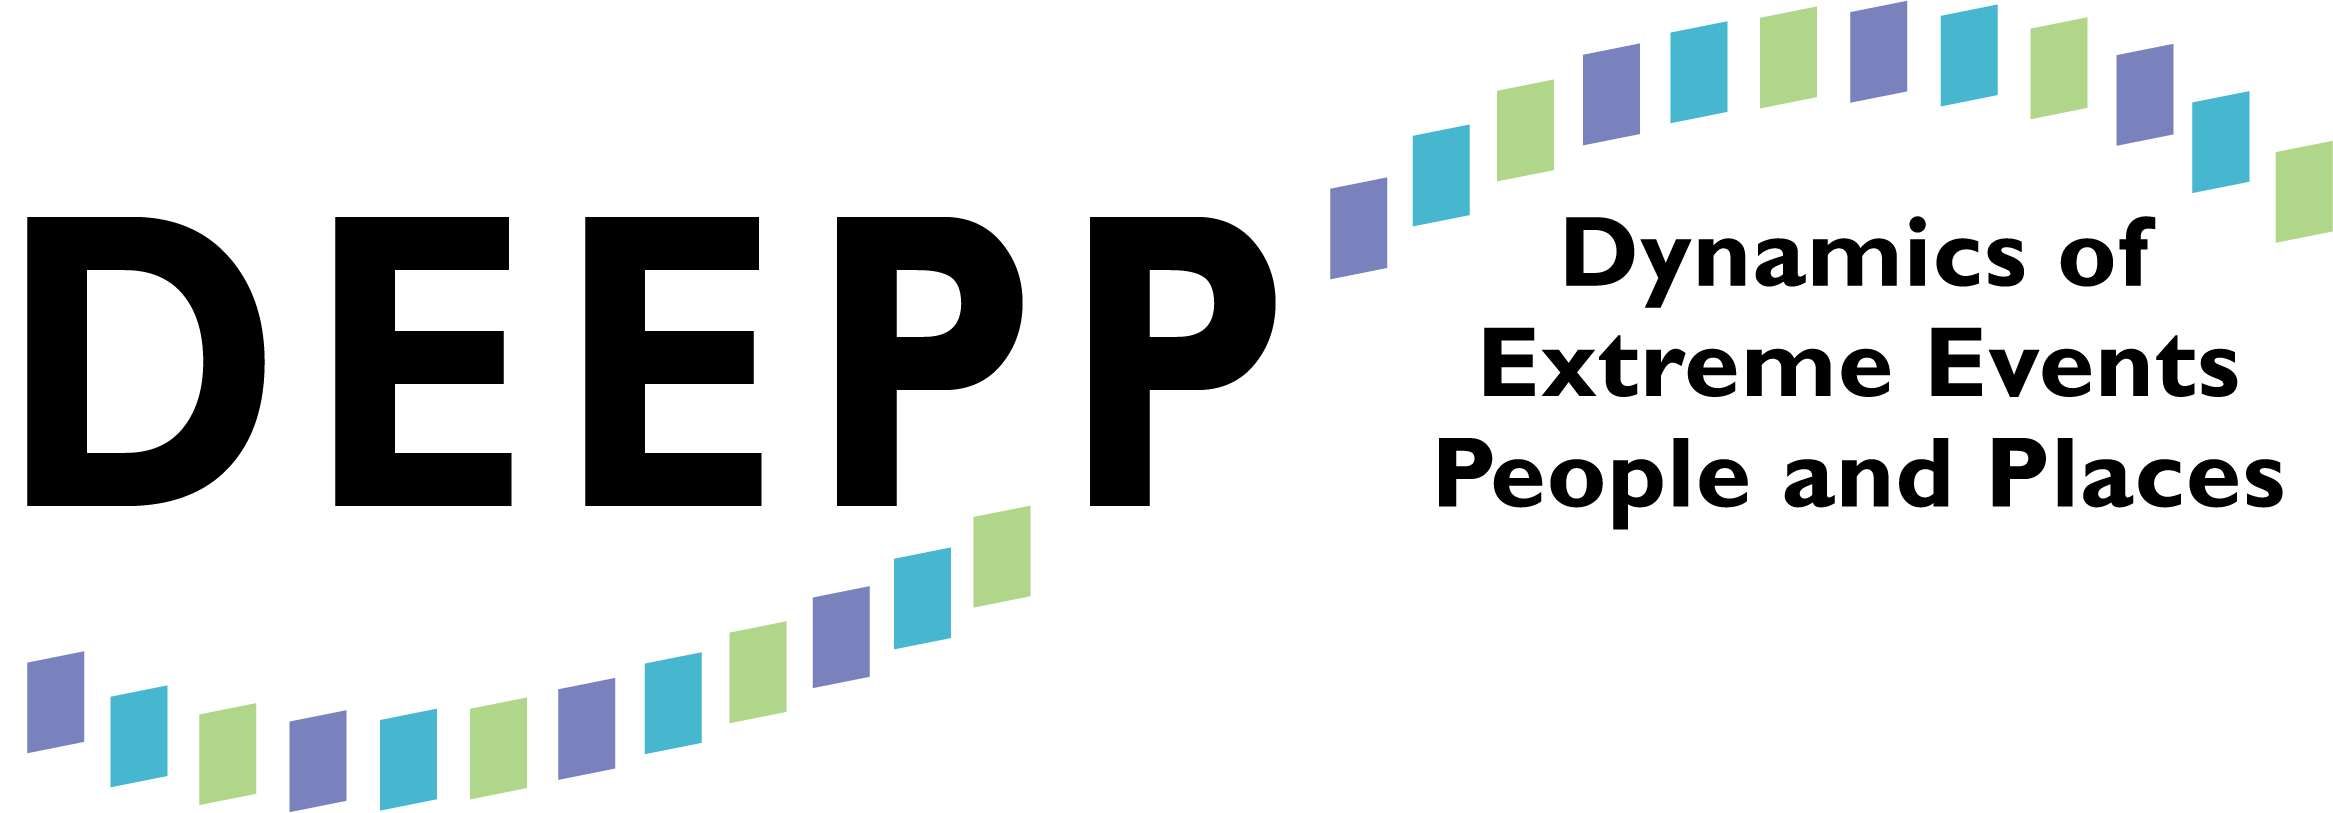 Dynamics of Extreme Events, People, and Places (DEEPP) logo